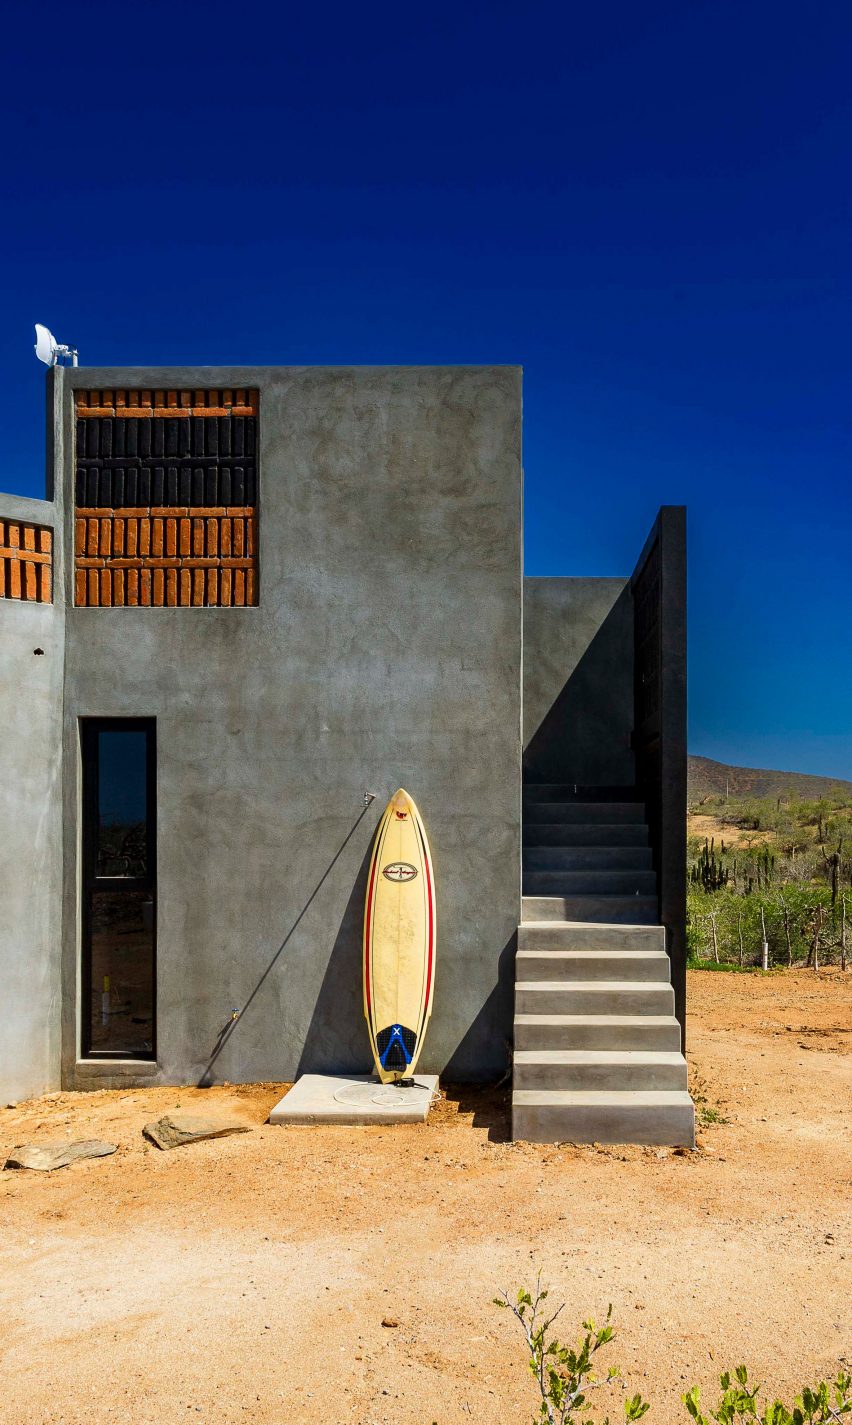 Concrete home with surfboard